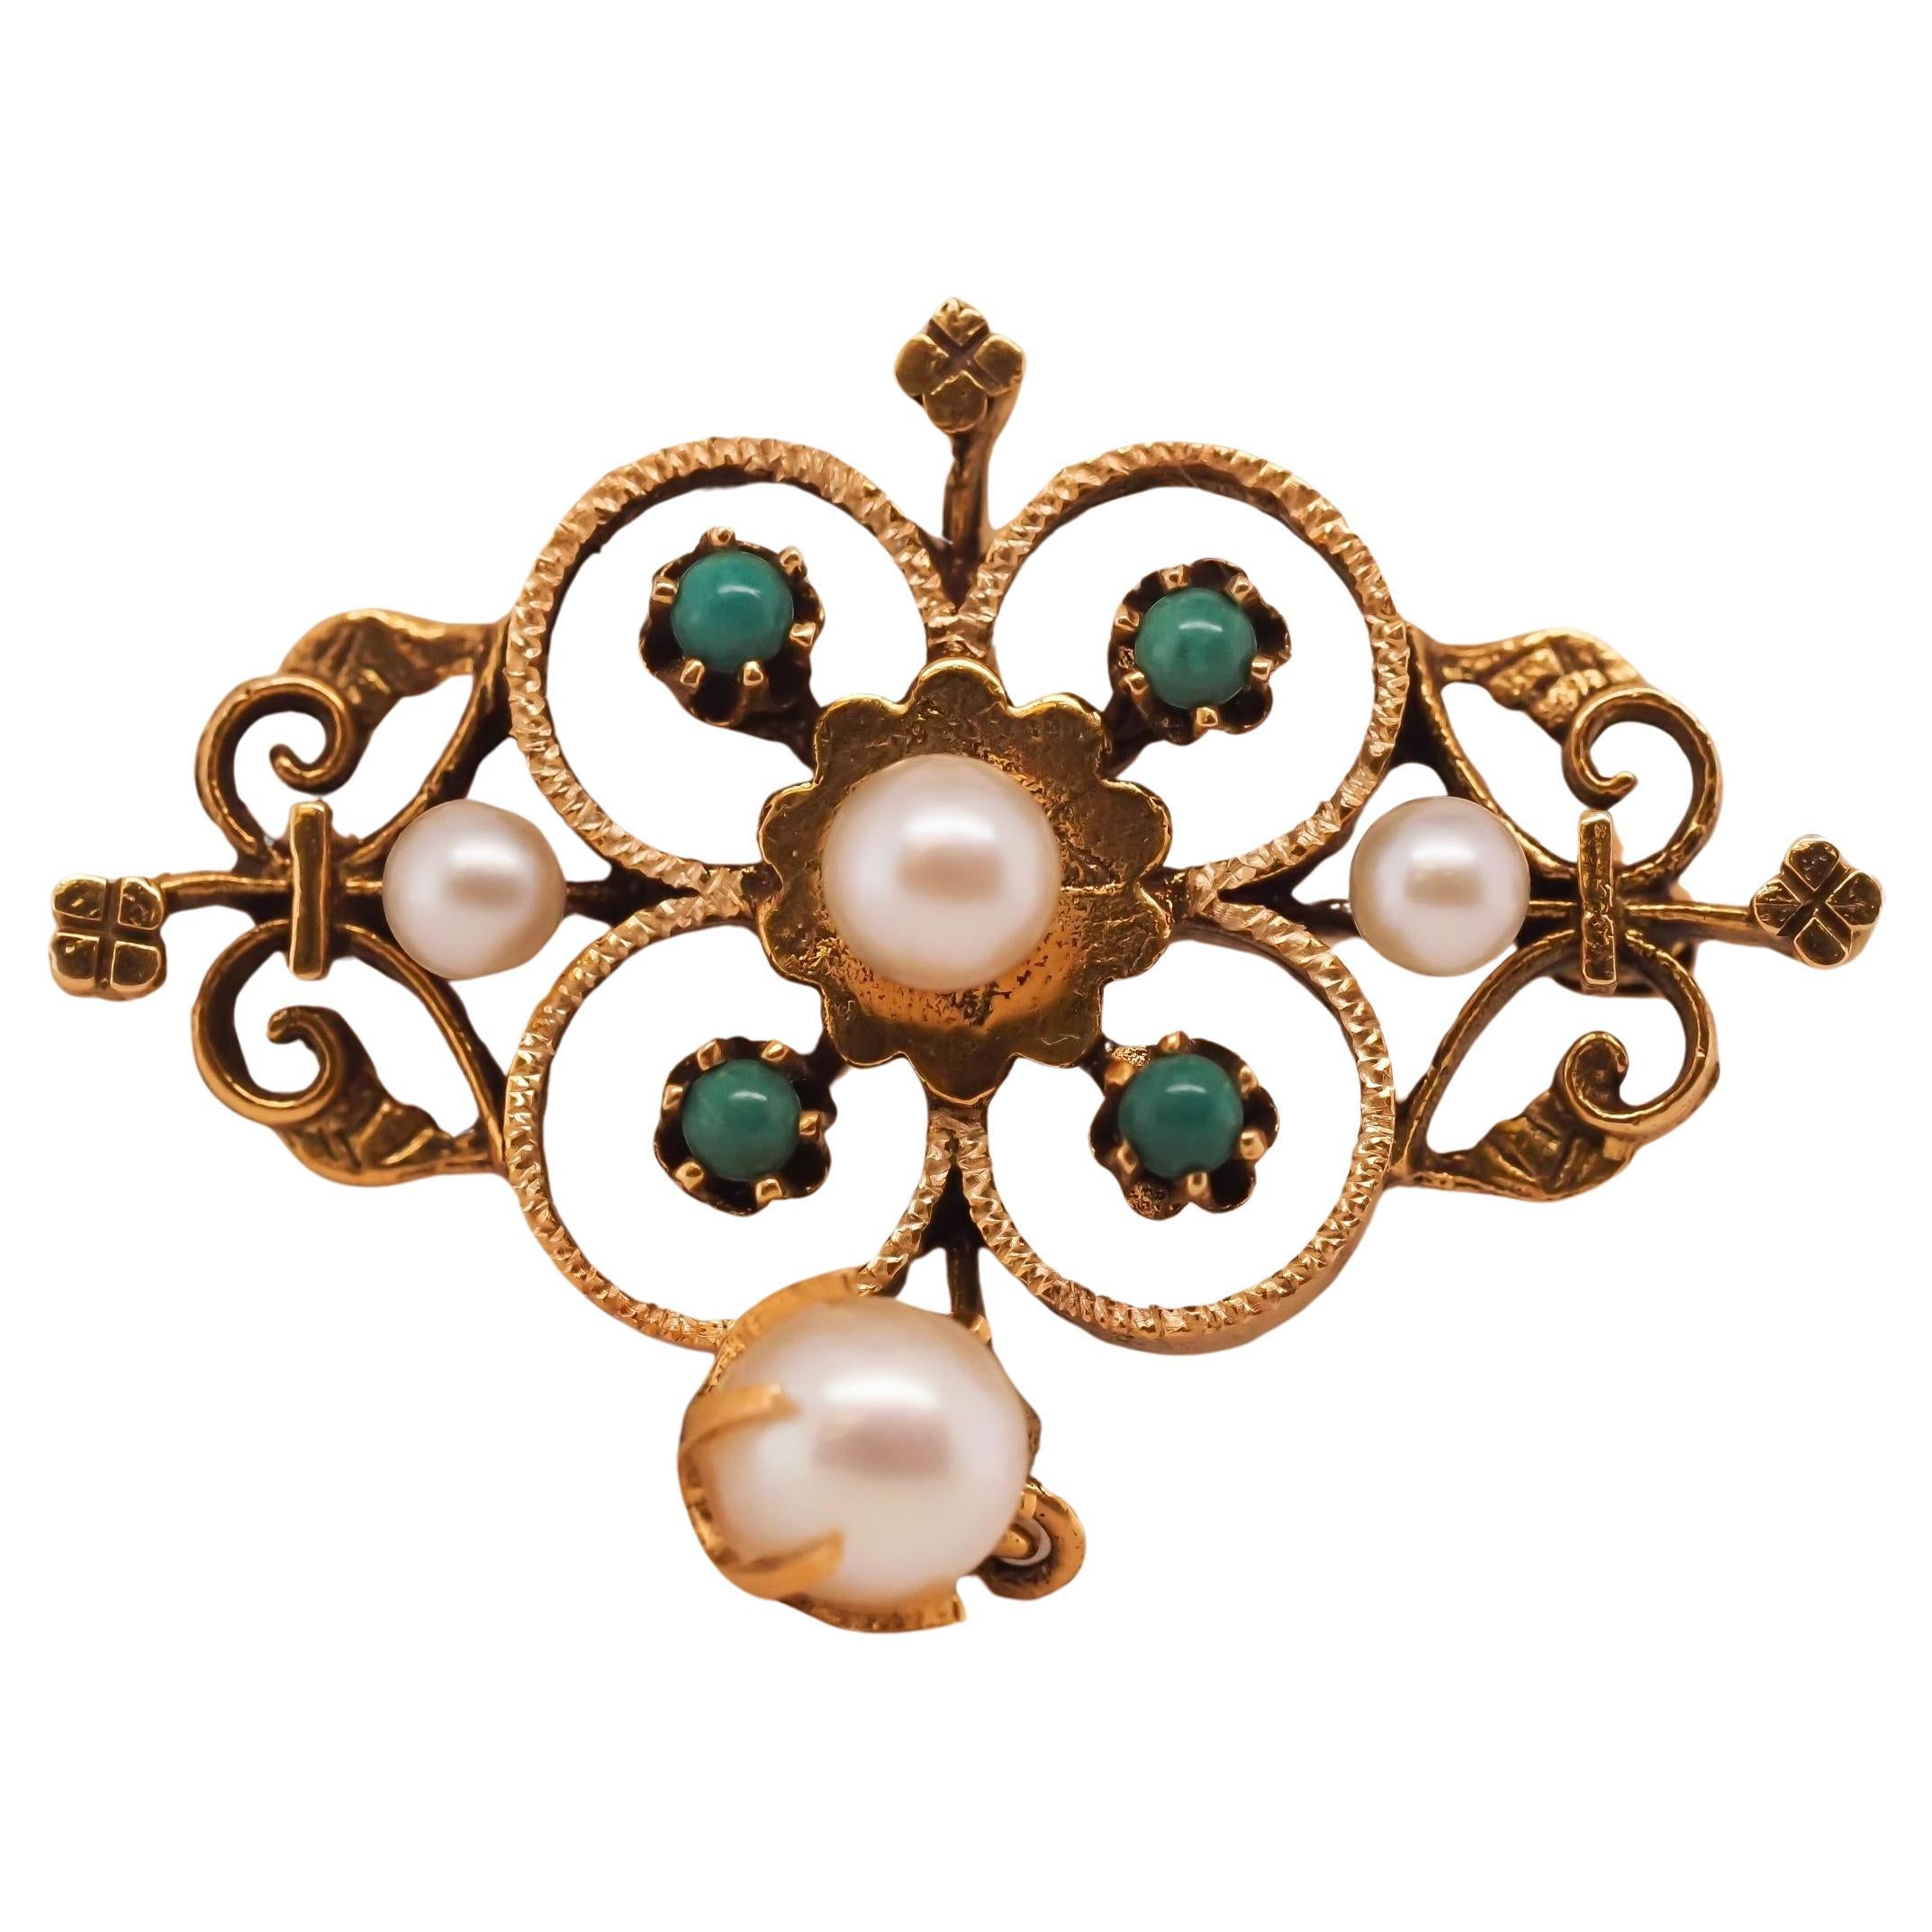 1950s 14K Yellow Gold Pearl and Turquoise Brooch and Pendant